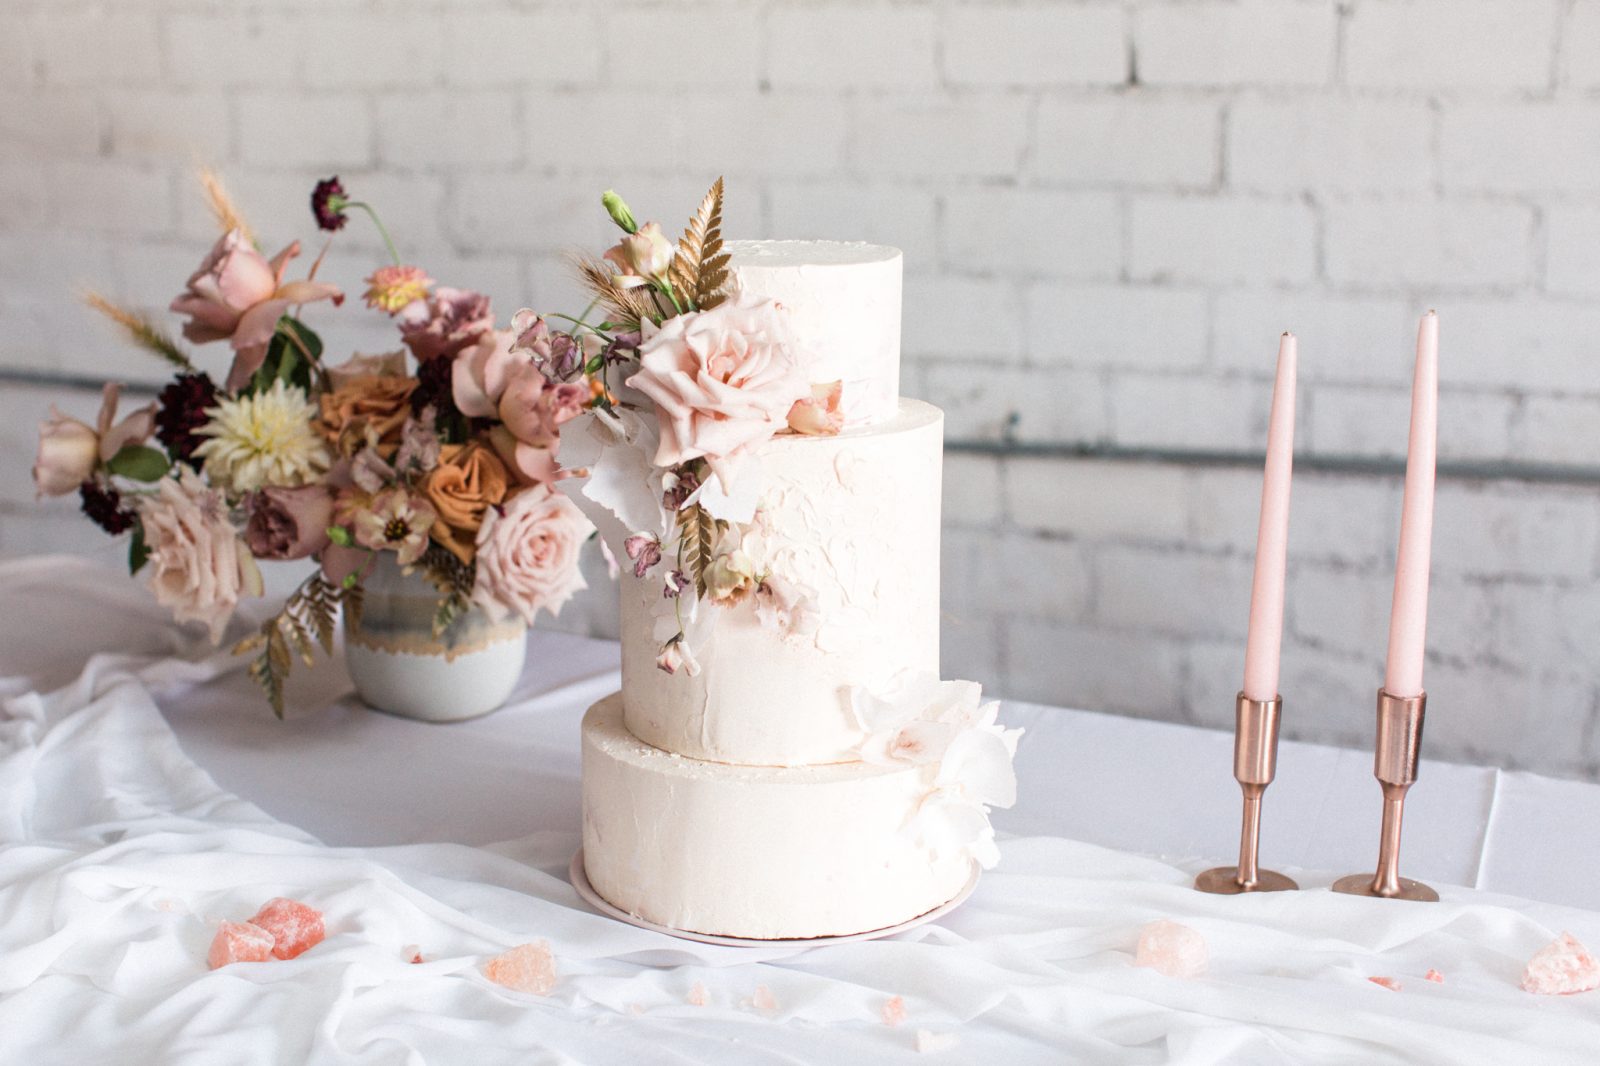 Fall Wedding Inspiration at 4Eleven by Sami Kathryn Photography & Alexa Kay Events